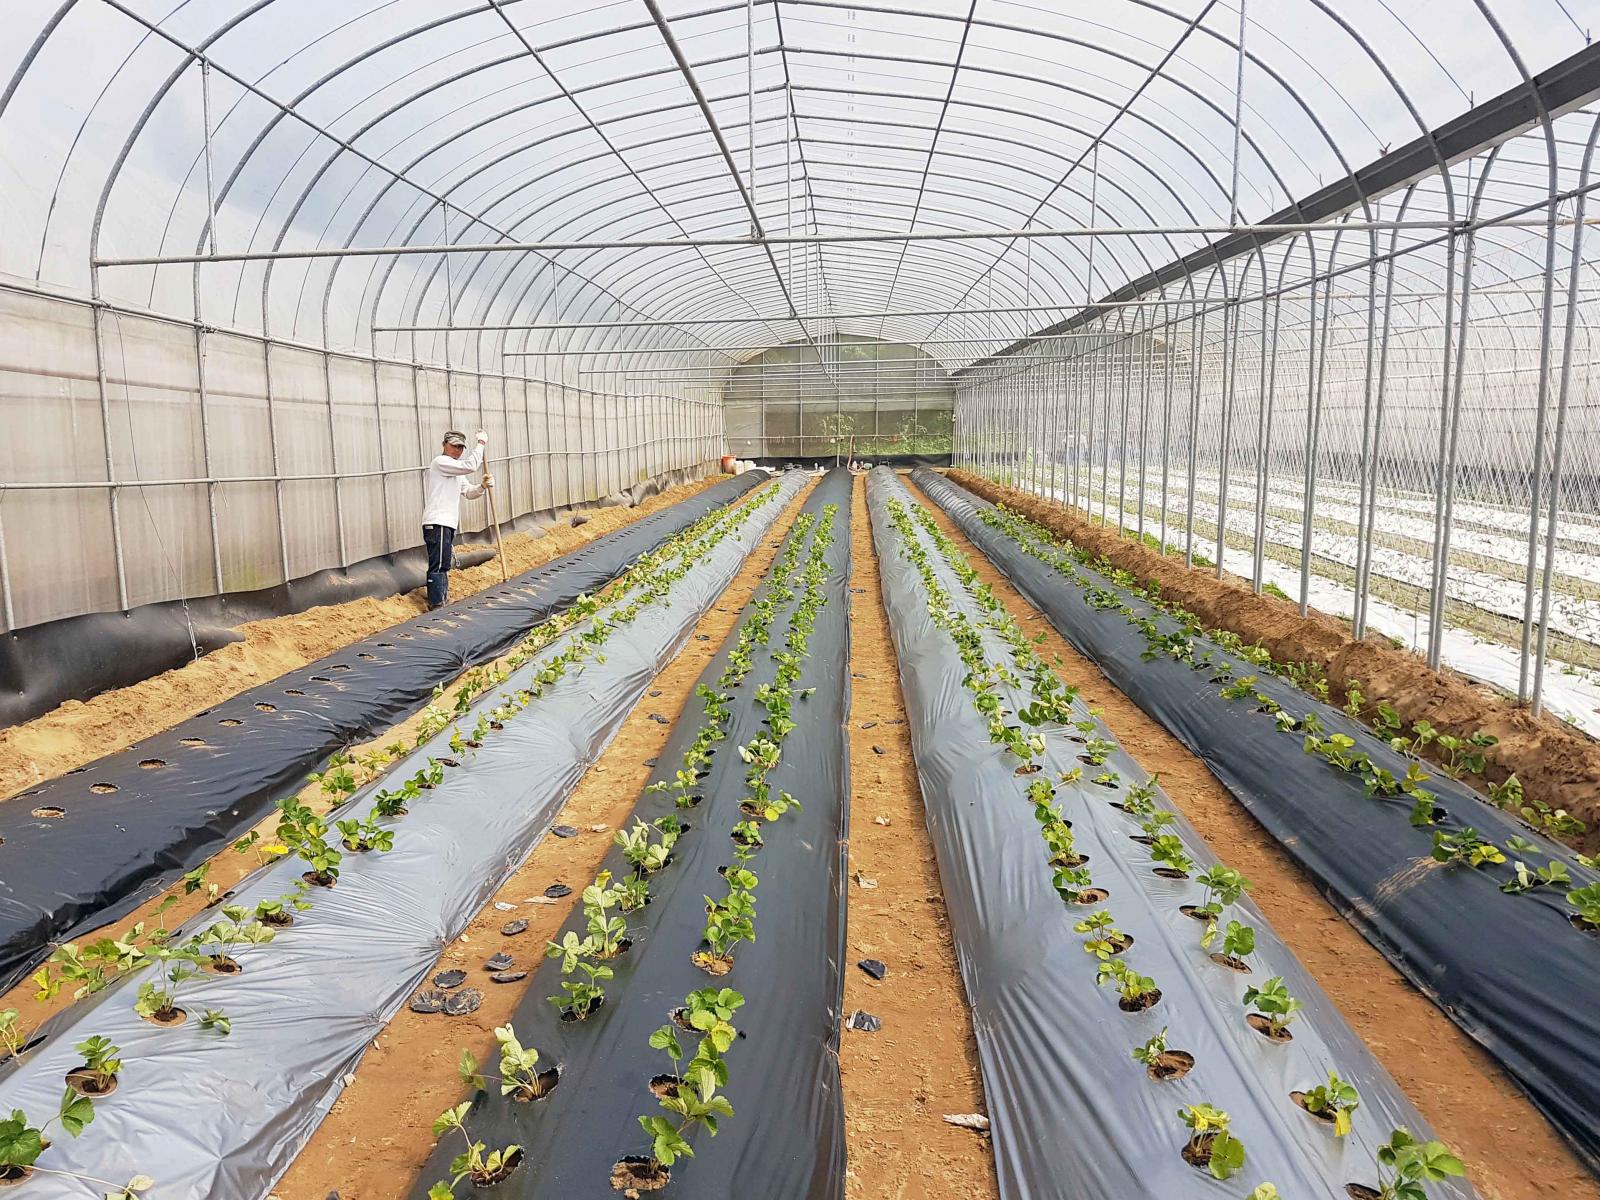 Farmers make use of biodegradable agricultural film in the PE-house. 